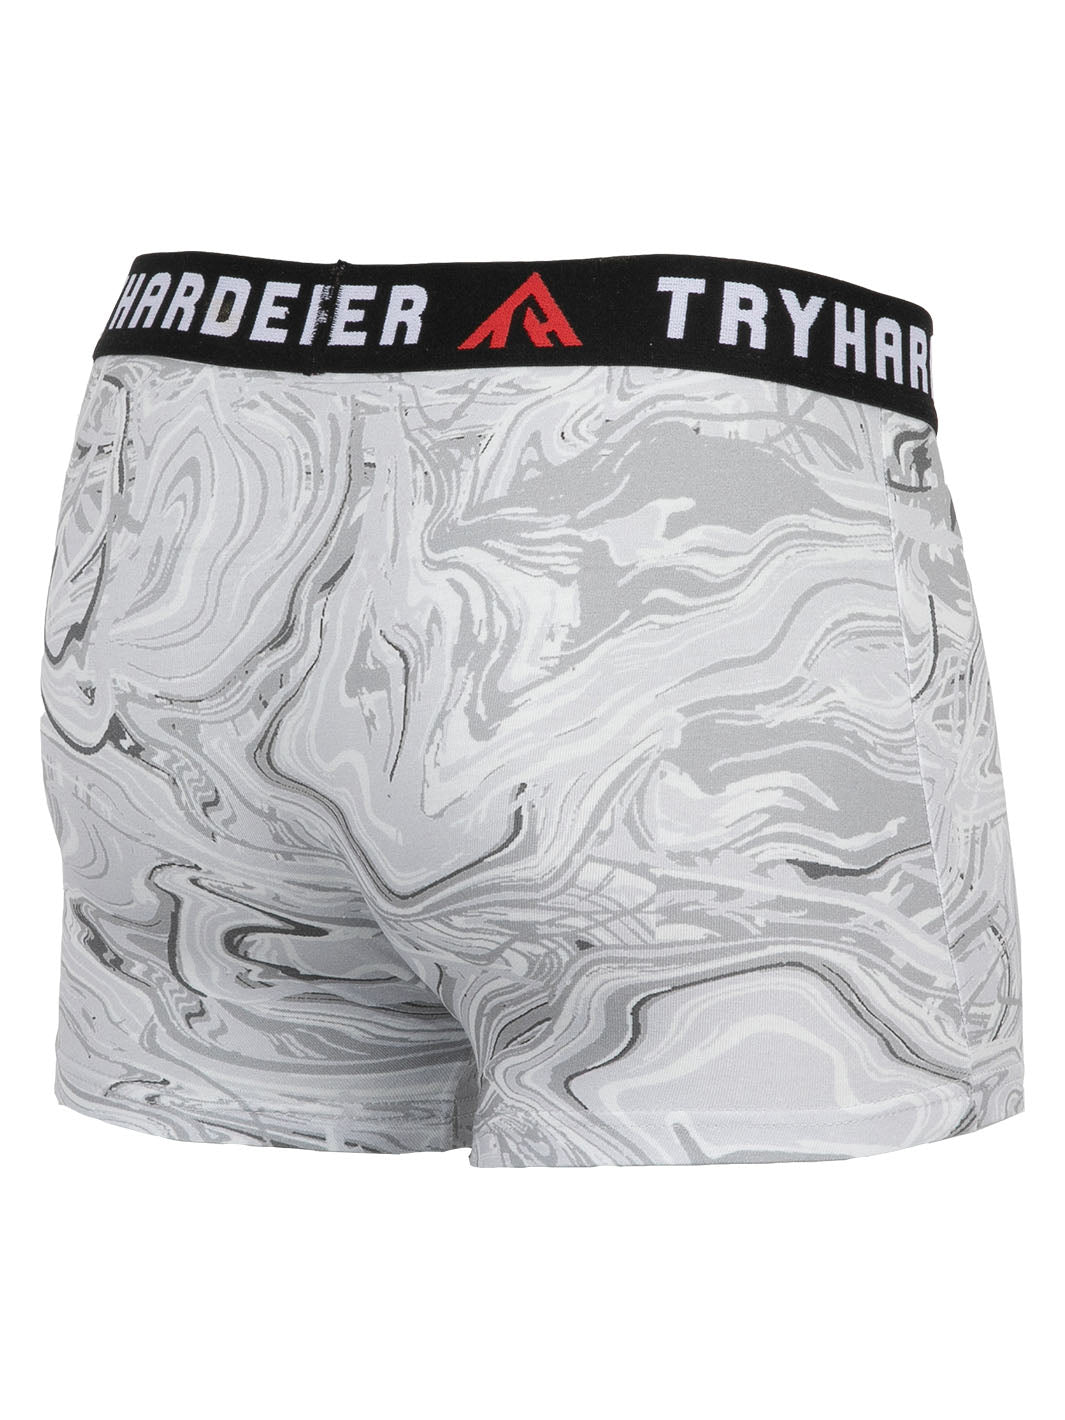 TRYHARDER - Boxer - Marble Grey 1 pack